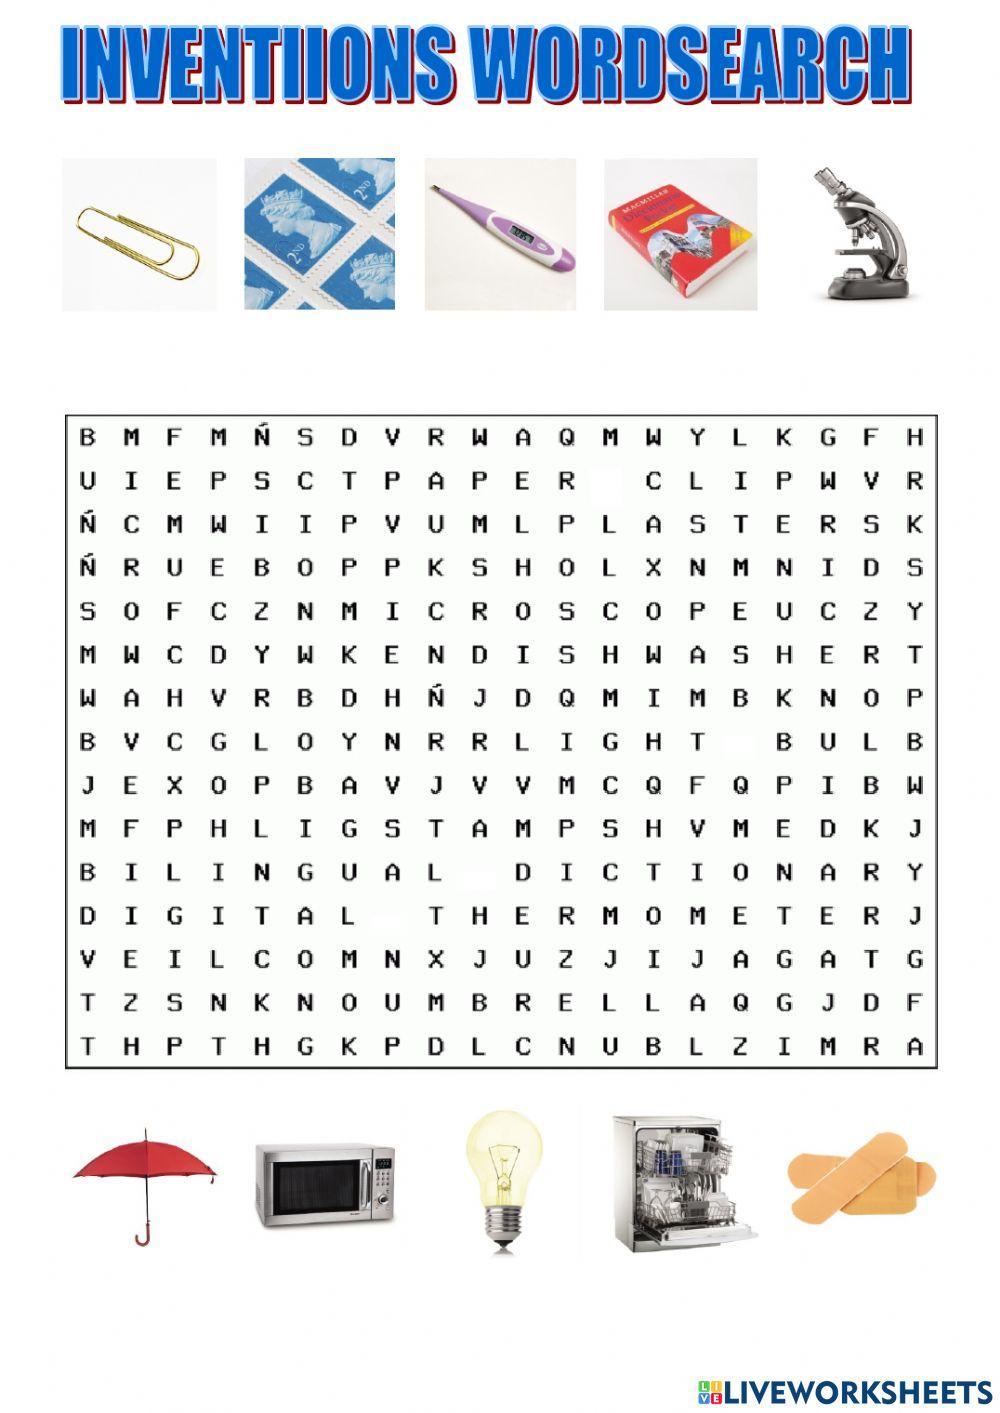 Inventions wordsearch tiger macmillan 6